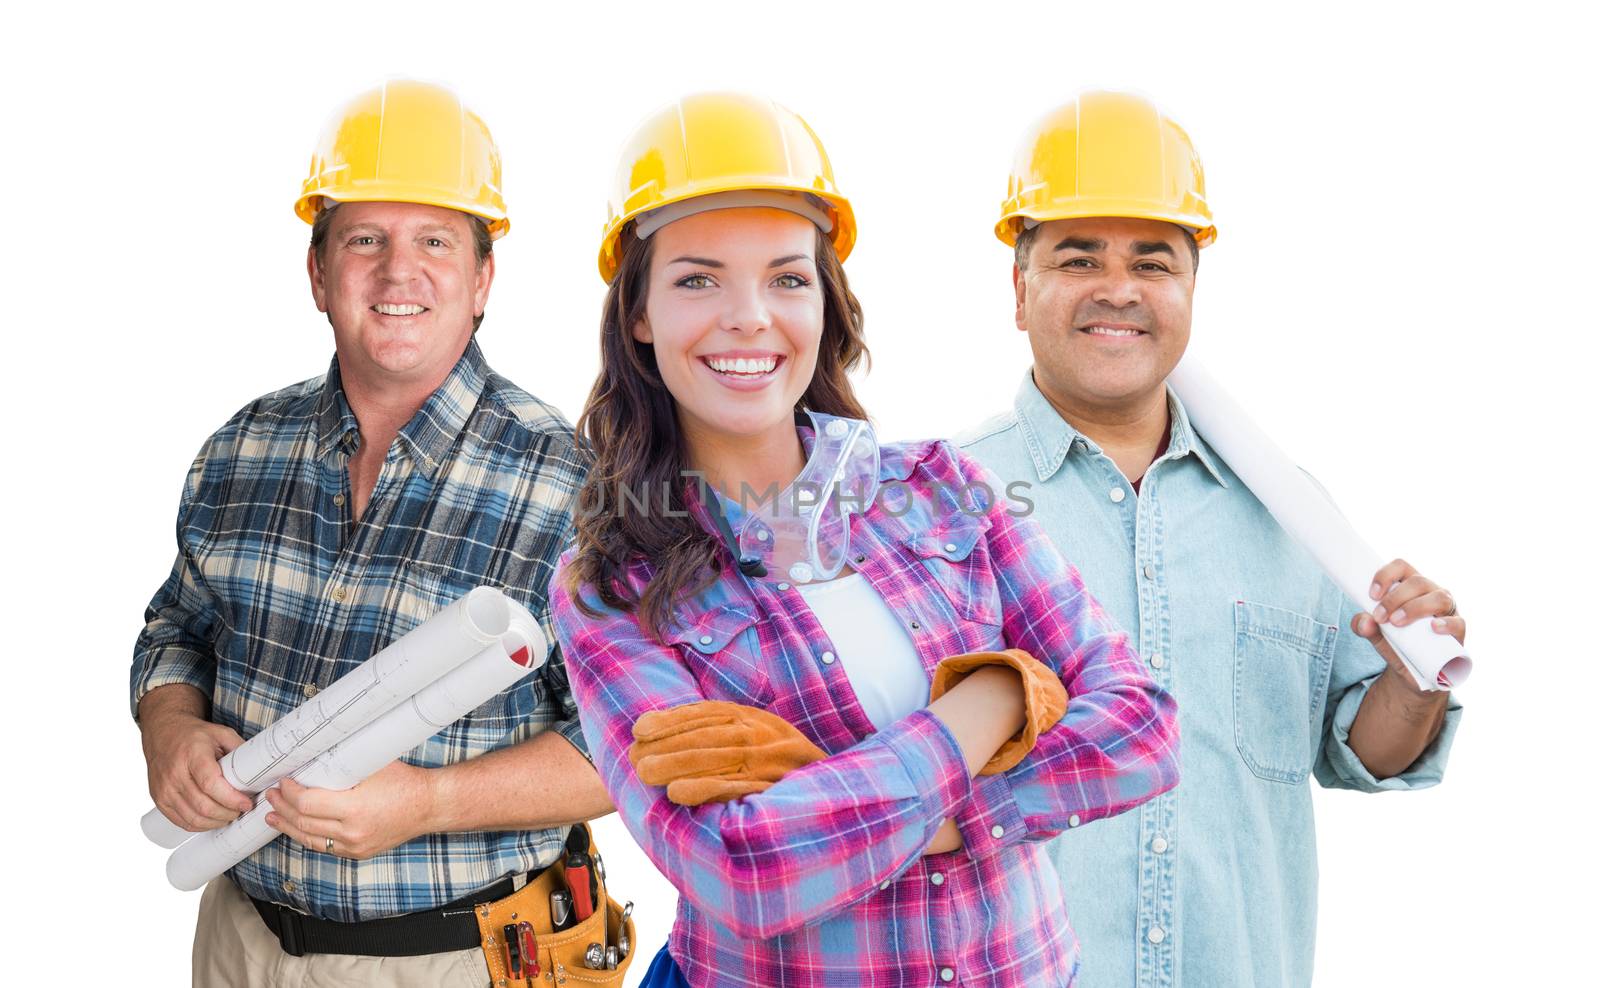 Female and Male Contractors In Hard Hats Isolated on White Backg by Feverpitched